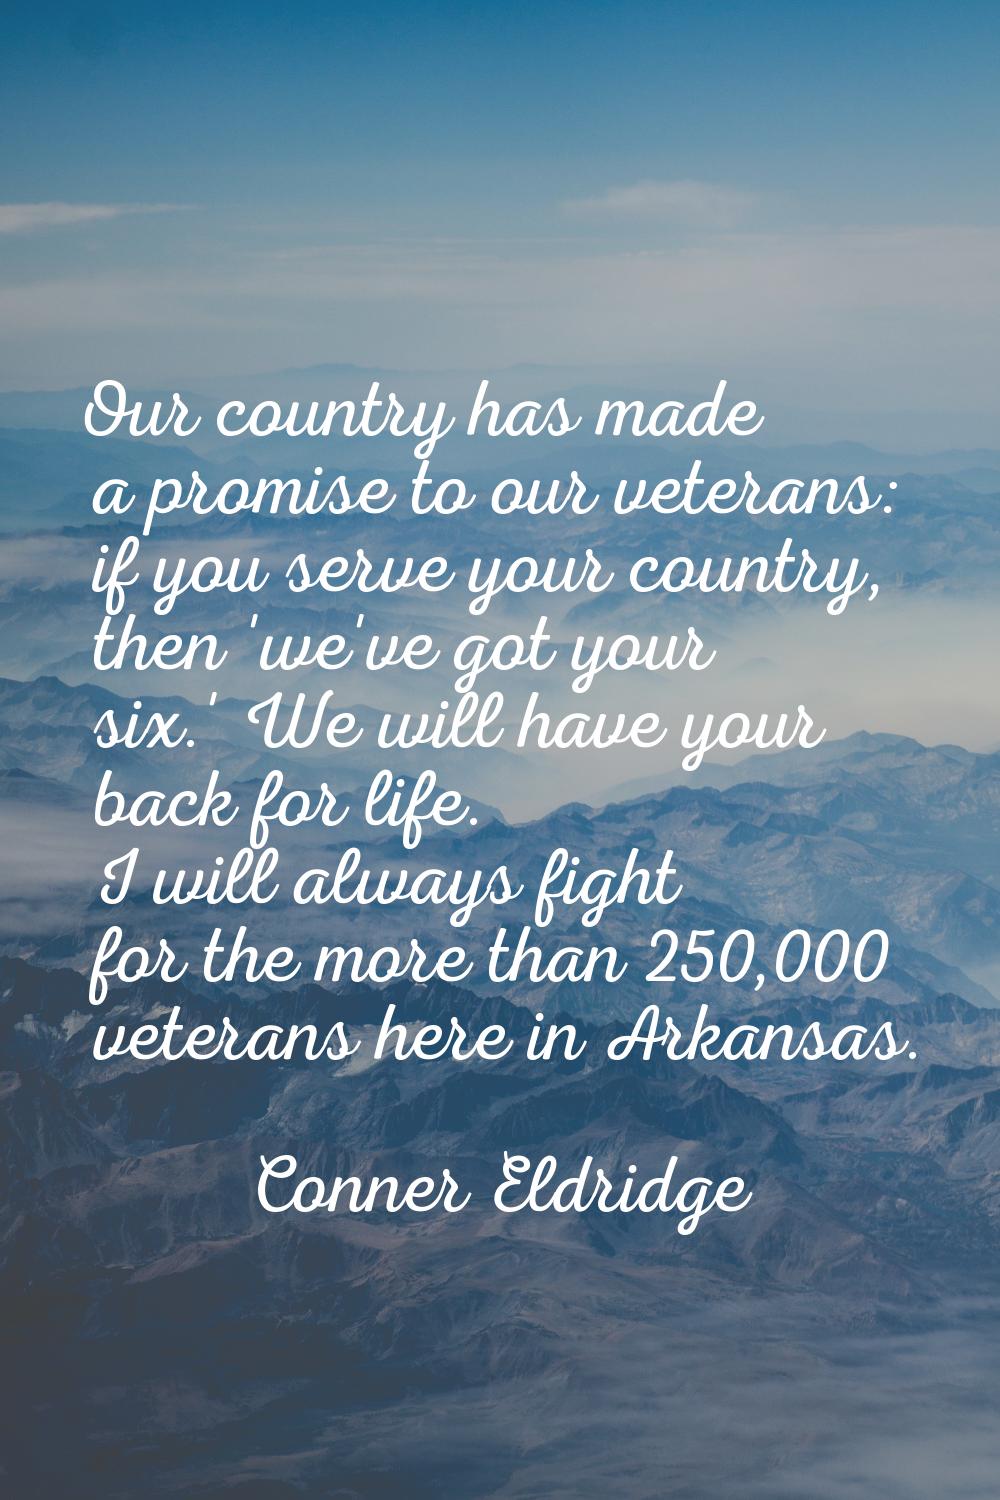 Our country has made a promise to our veterans: if you serve your country, then 'we've got your six